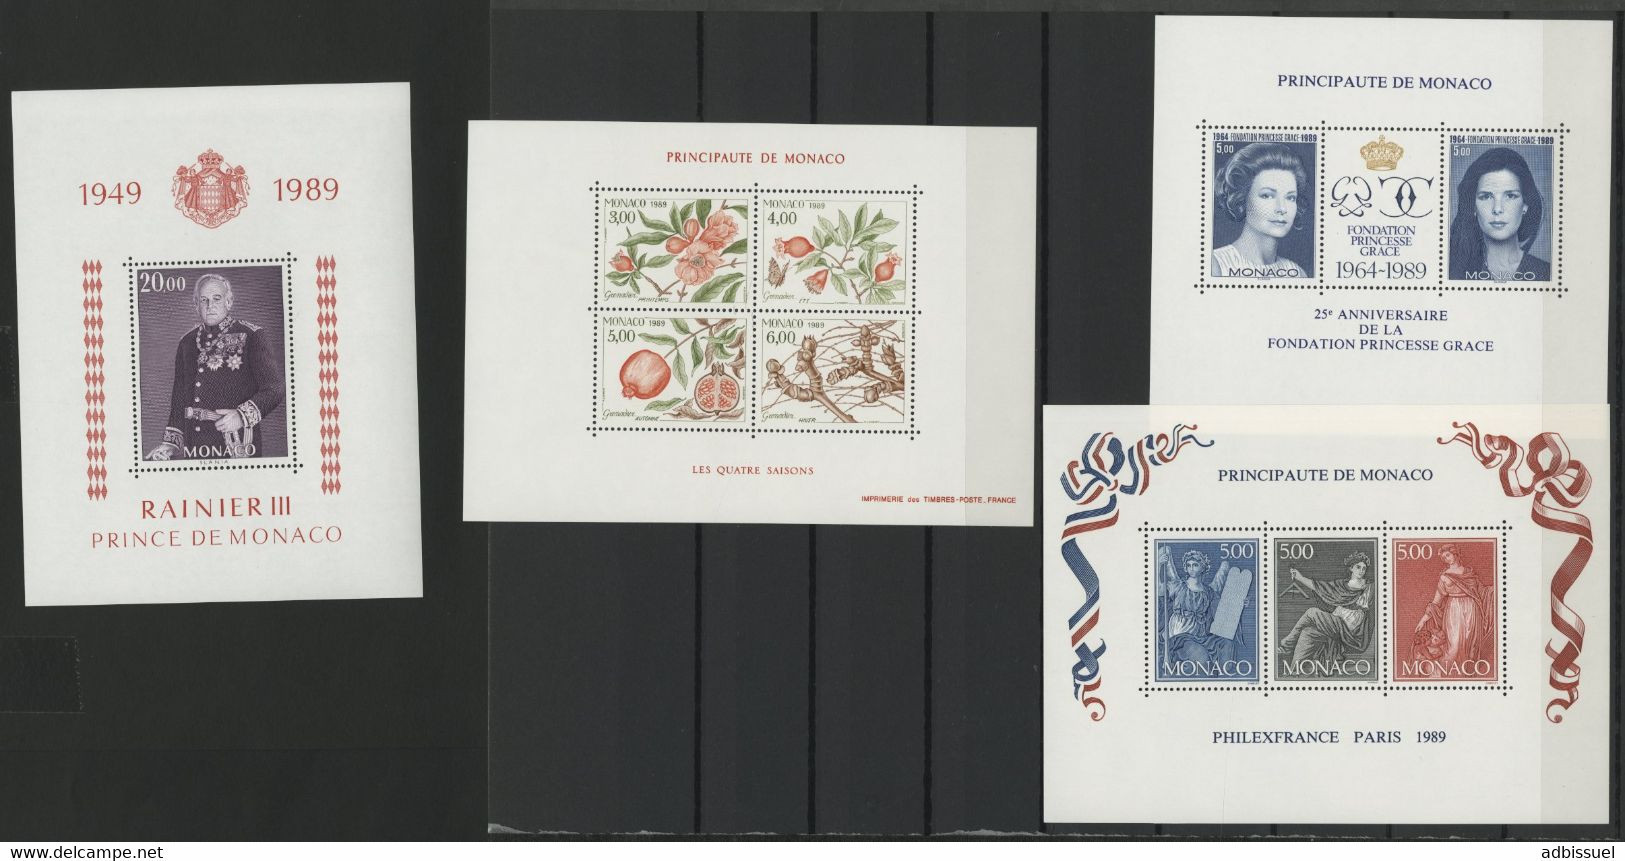 MONACO ANNEE COMPLETE 1989 COTE 134 € NEUFS ** MNH N°1663 à 1704 Soit 42 Timbres. TB - Años Completos